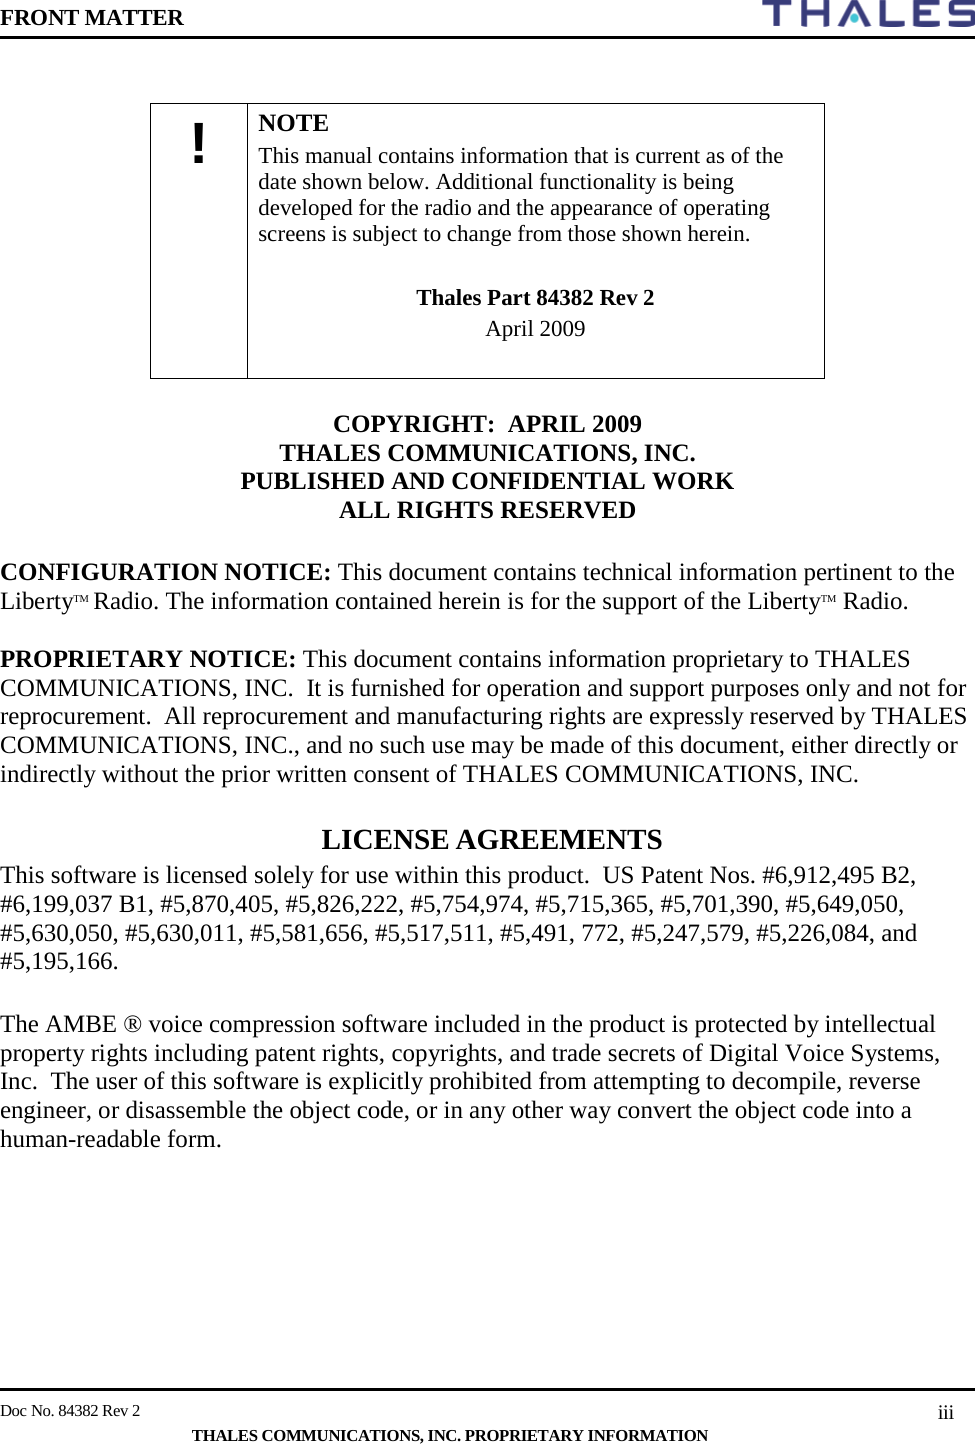 FRONT MATTER    Doc No. 84382 Rev 2     THALES COMMUNICATIONS, INC. PROPRIETARY INFORMATION iii             COPYRIGHT:  APRIL 2009  THALES COMMUNICATIONS, INC.  PUBLISHED AND CONFIDENTIAL WORK  ALL RIGHTS RESERVED  CONFIGURATION NOTICE: This document contains technical information pertinent to the LibertyTM Radio. The information contained herein is for the support of the LibertyTM Radio.  PROPRIETARY NOTICE: This document contains information proprietary to THALES COMMUNICATIONS, INC.  It is furnished for operation and support purposes only and not for reprocurement.  All reprocurement and manufacturing rights are expressly reserved by THALES COMMUNICATIONS, INC., and no such use may be made of this document, either directly or indirectly without the prior written consent of THALES COMMUNICATIONS, INC.  LICENSE AGREEMENTS  This software is licensed solely for use within this product.  US Patent Nos. #6,912,495 B2,  #6,199,037 B1, #5,870,405, #5,826,222, #5,754,974, #5,715,365, #5,701,390, #5,649,050, #5,630,050, #5,630,011, #5,581,656, #5,517,511, #5,491, 772, #5,247,579, #5,226,084, and #5,195,166.  The AMBE ® voice compression software included in the product is protected by intellectual property rights including patent rights, copyrights, and trade secrets of Digital Voice Systems, Inc.  The user of this software is explicitly prohibited from attempting to decompile, reverse engineer, or disassemble the object code, or in any other way convert the object code into a human-readable form.      !  NOTE This manual contains information that is current as of the date shown below. Additional functionality is being developed for the radio and the appearance of operating screens is subject to change from those shown herein.   Thales Part 84382 Rev 2  April 2009  